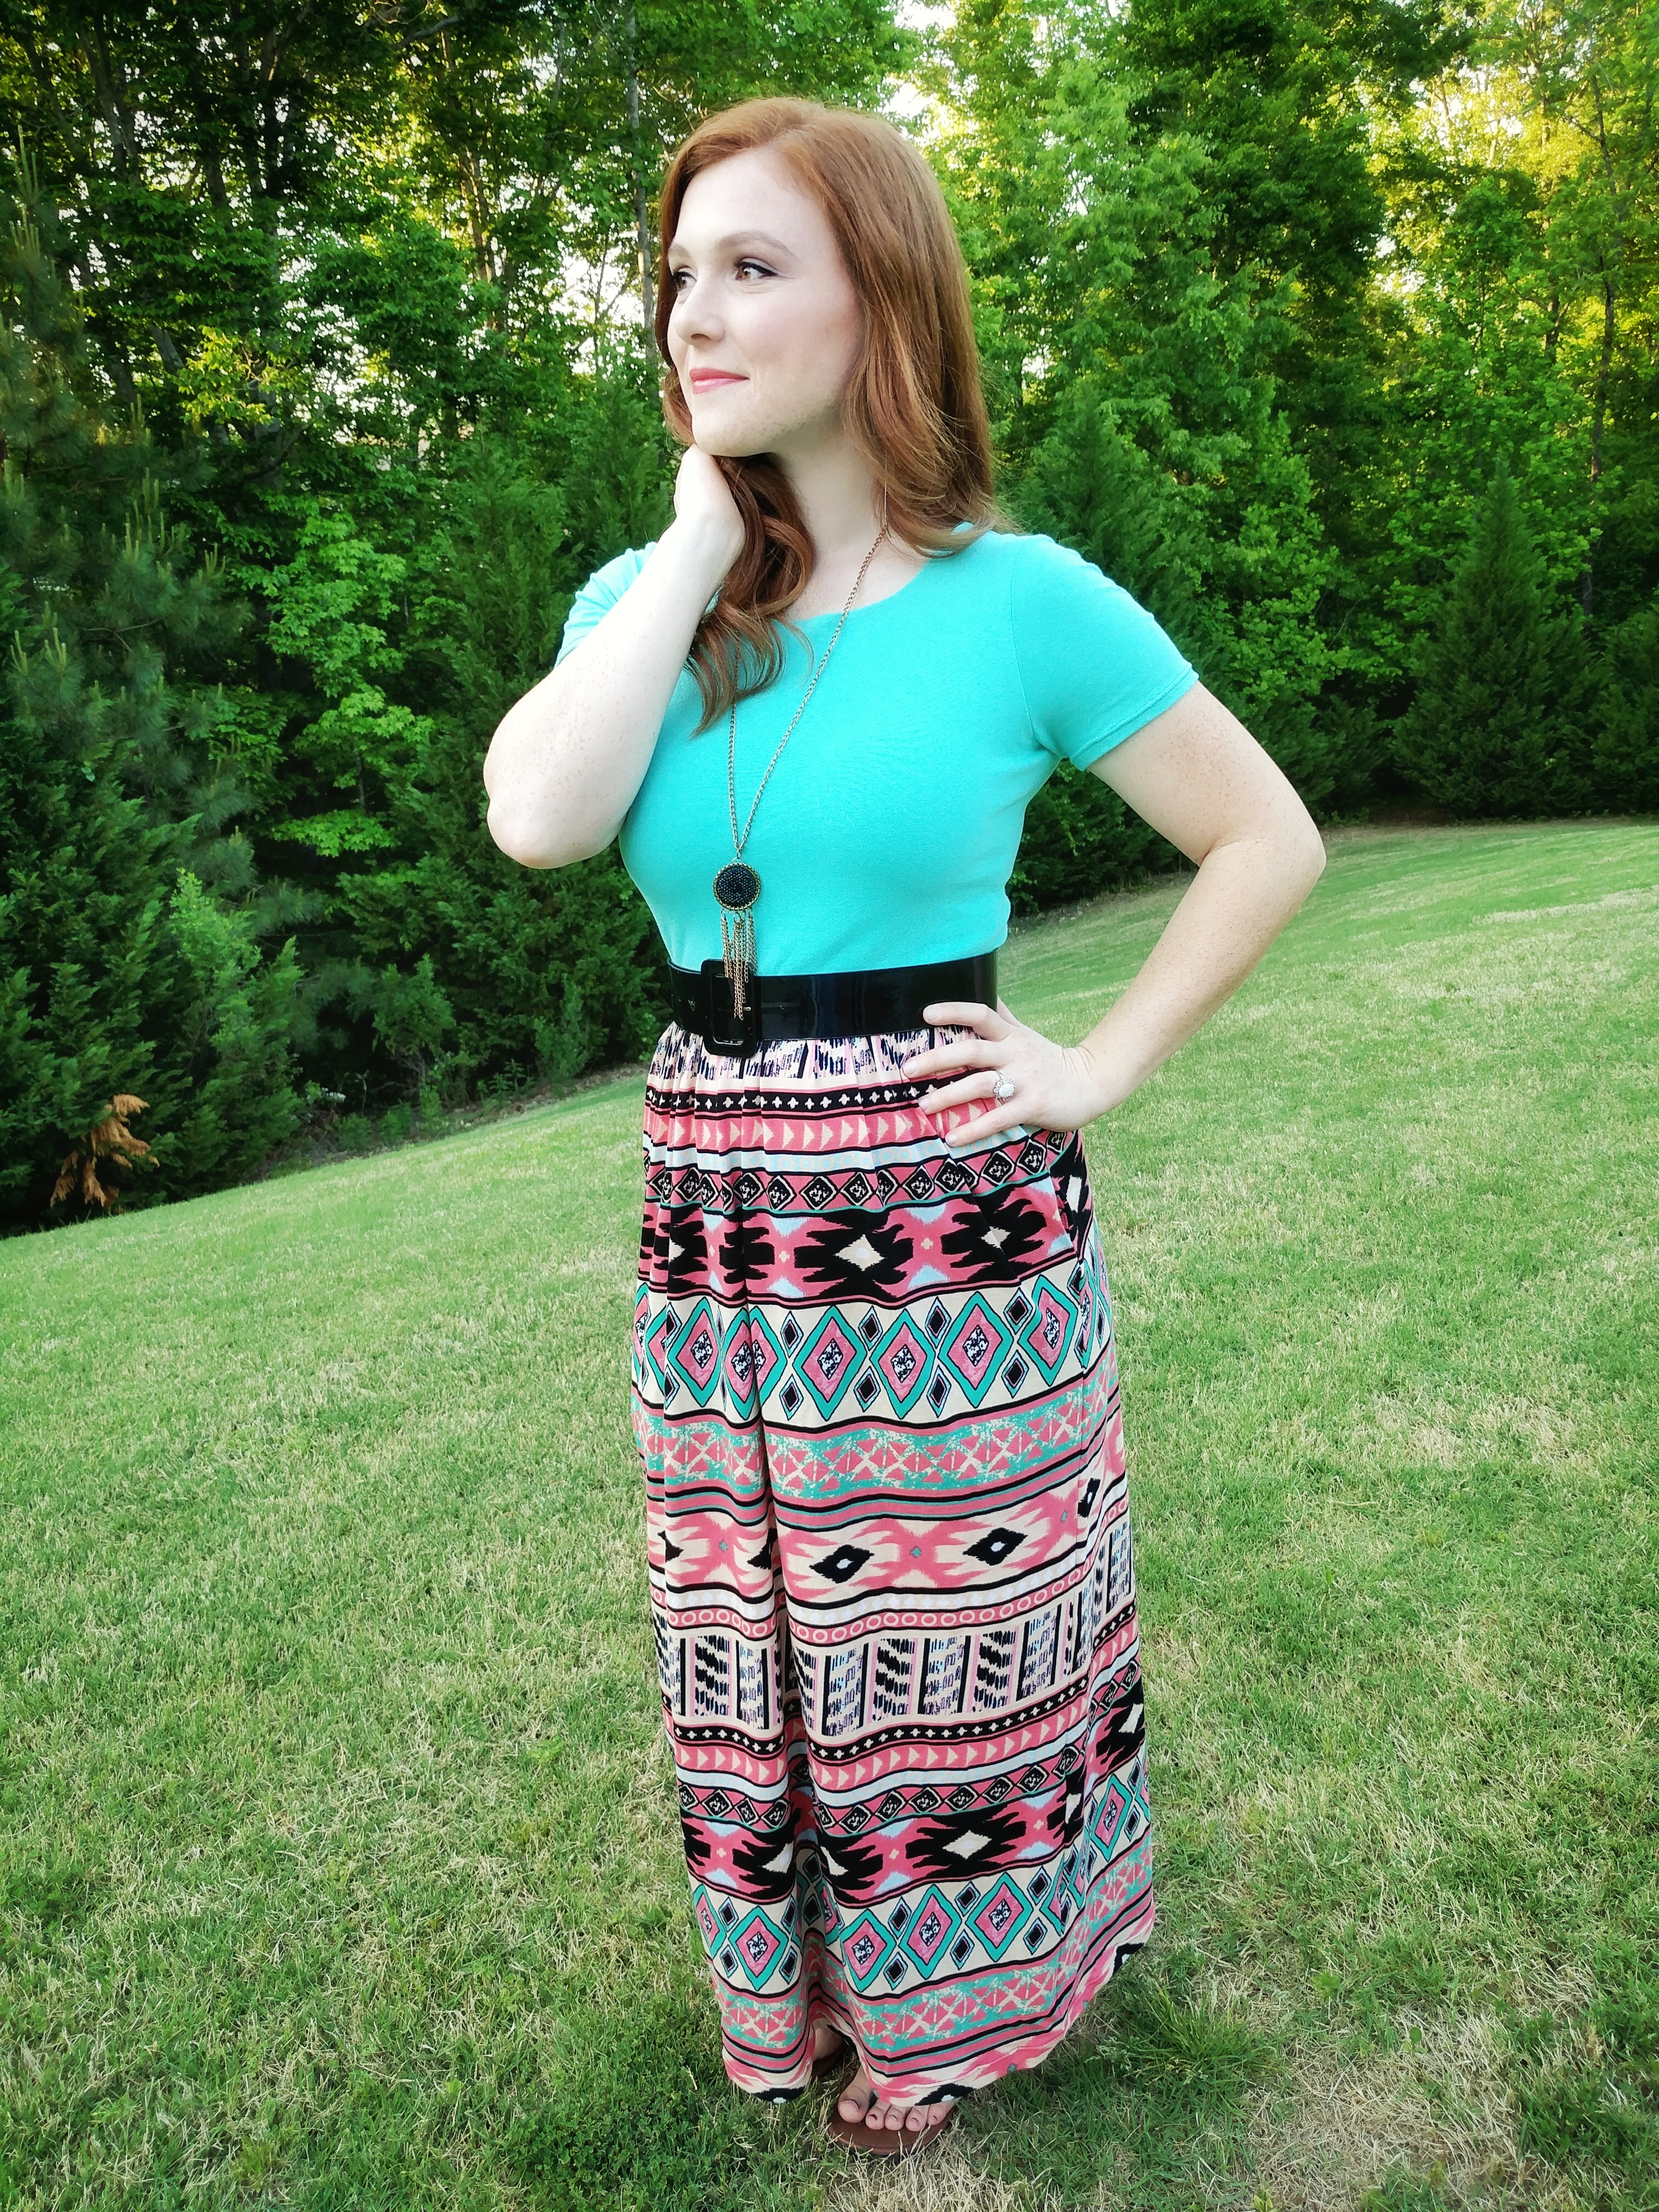 Finished teal and patterned maxi dress